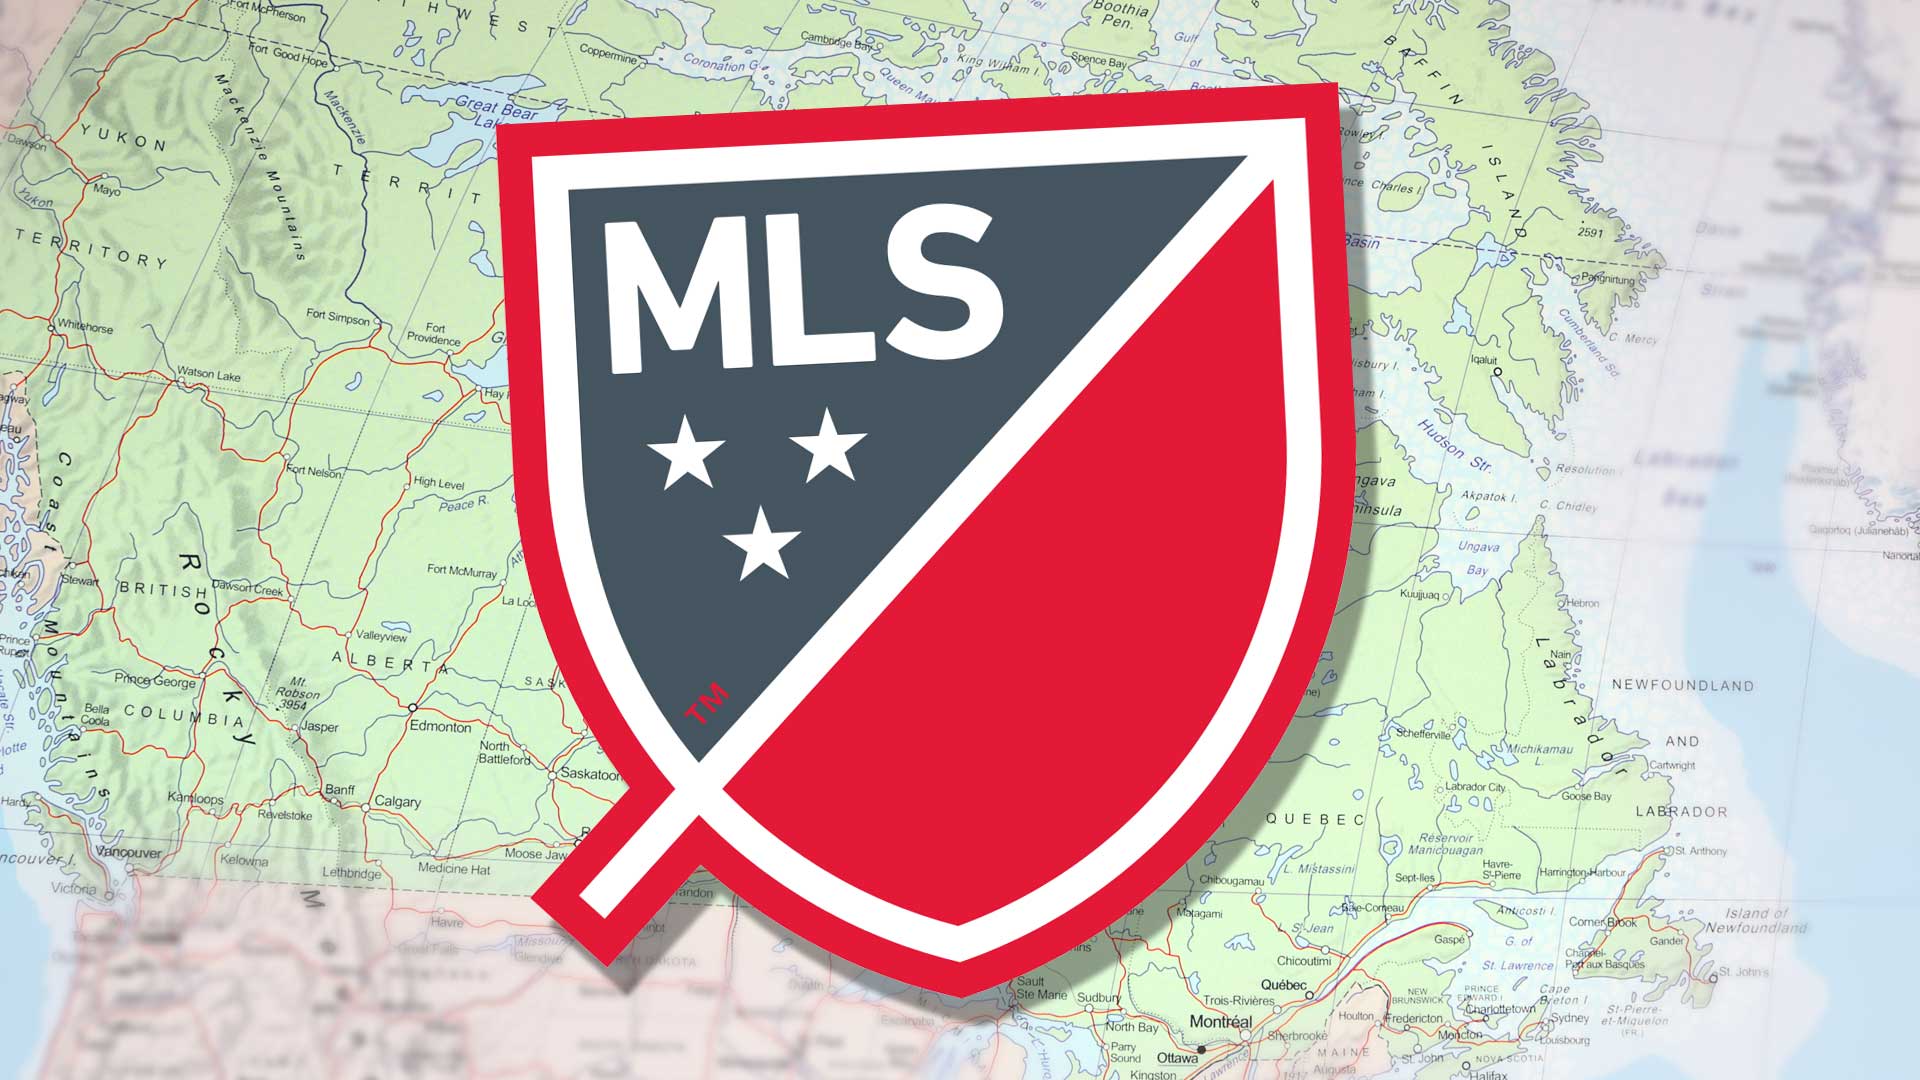 Toronto MLS badge over a map of Canada